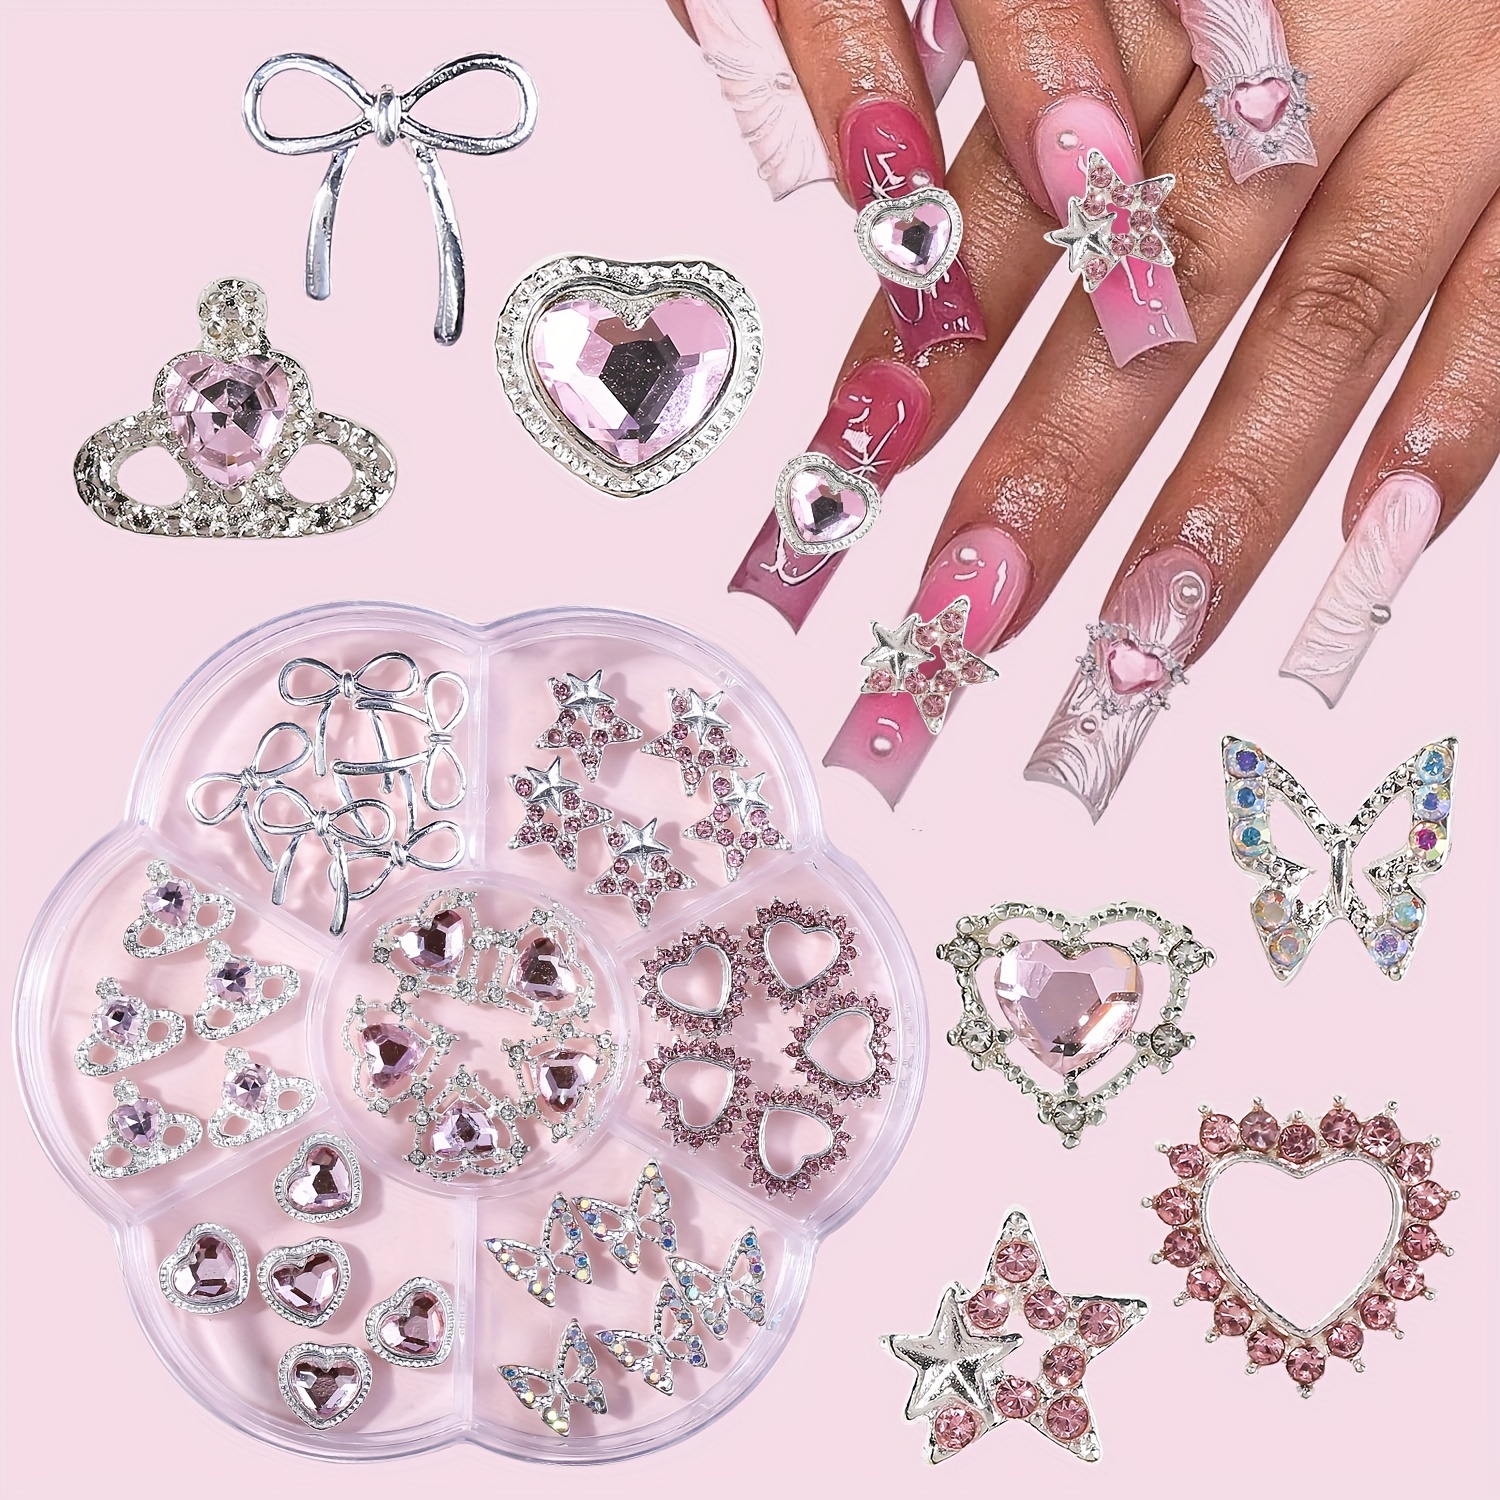 

35pcs Nail Art Decorations Set, Rhinestone Butterfly, Heart, Crown, Bow Designs In Case, Assorted Manicure Charms For Diy Nail Design And Salon Use